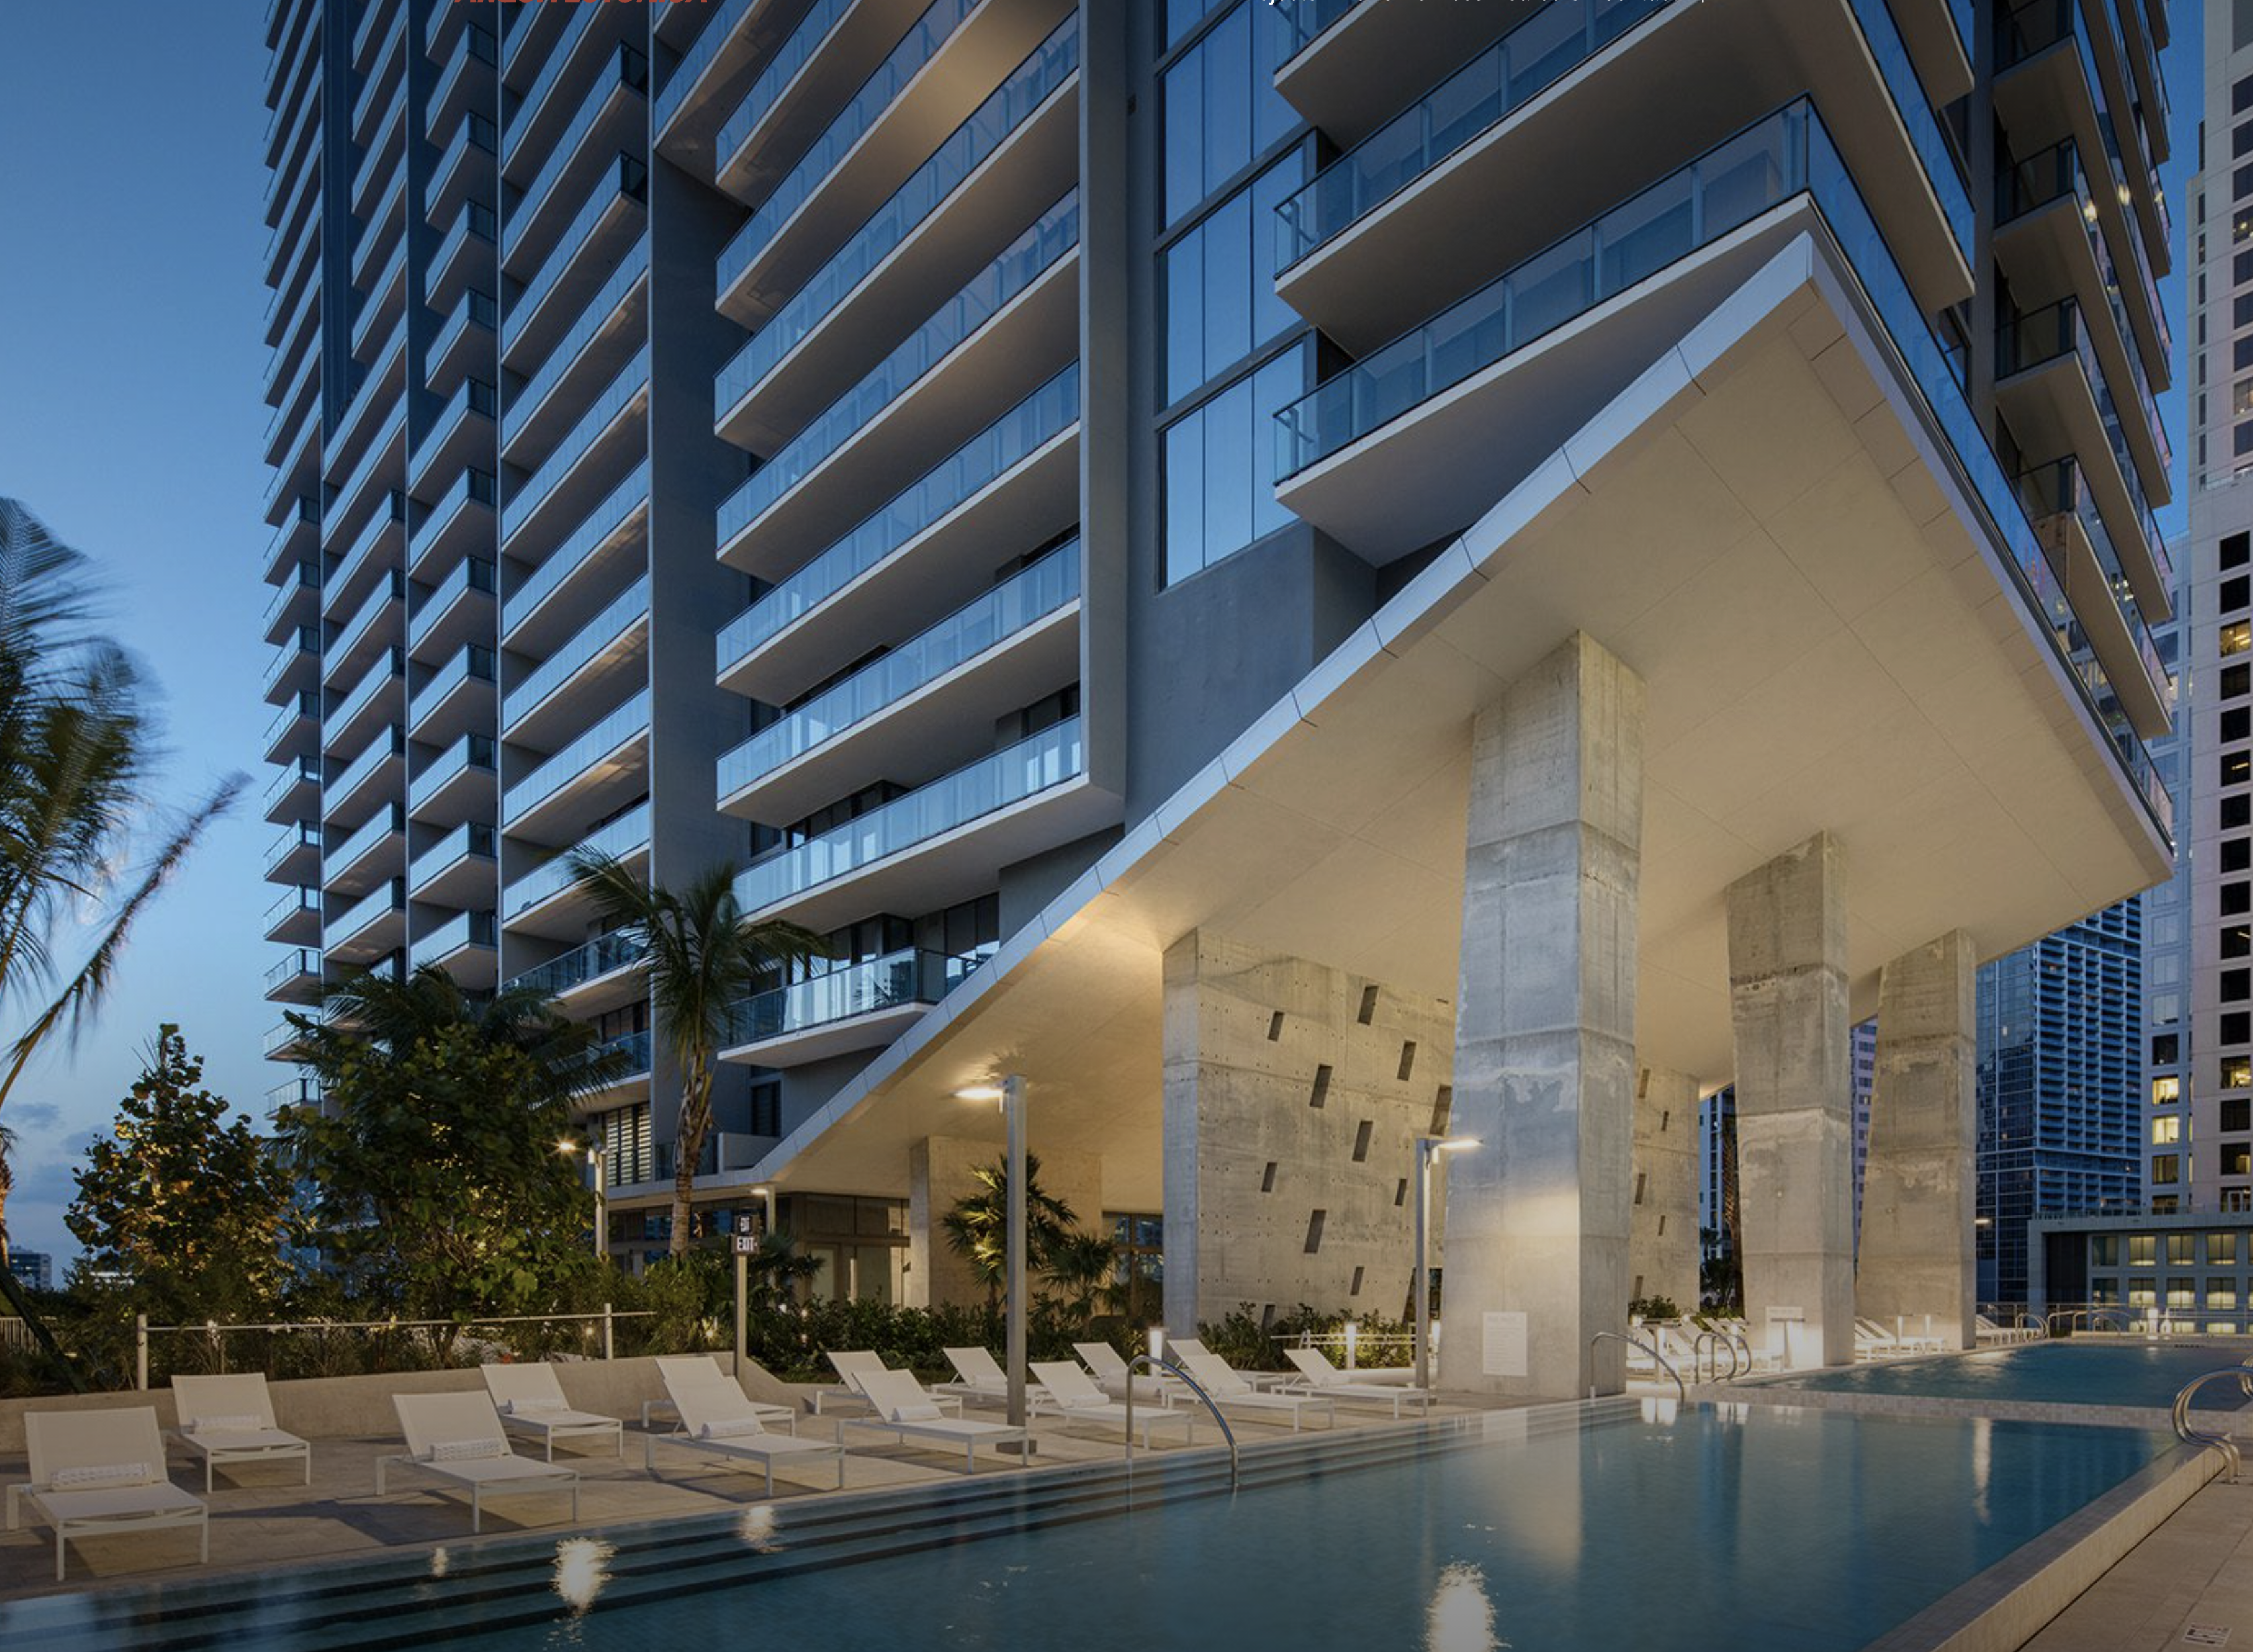 Brickell City Centre. Designed by Arquitectonica.